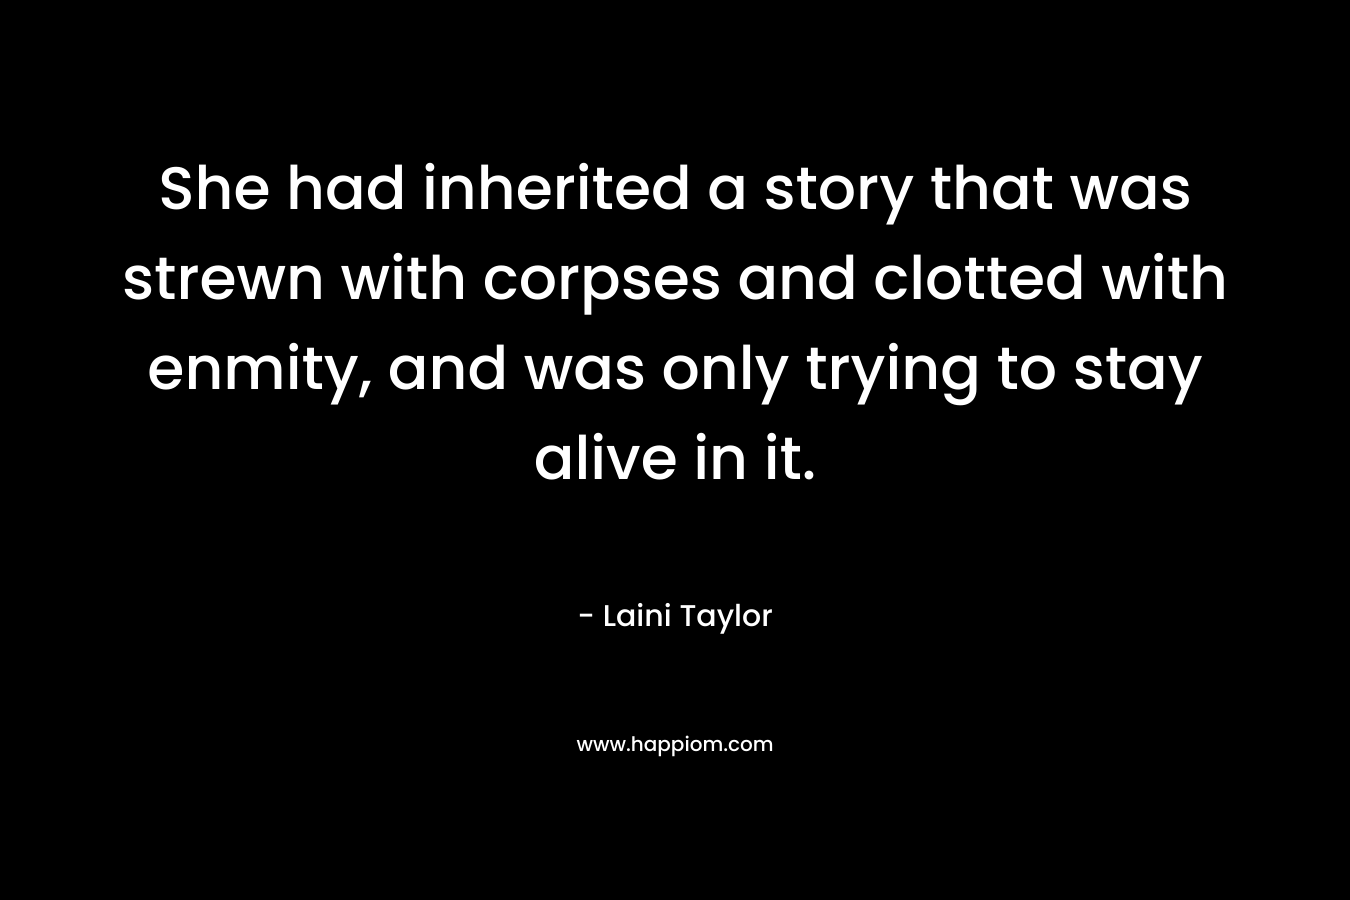 She had inherited a story that was strewn with corpses and clotted with enmity, and was only trying to stay alive in it. – Laini Taylor